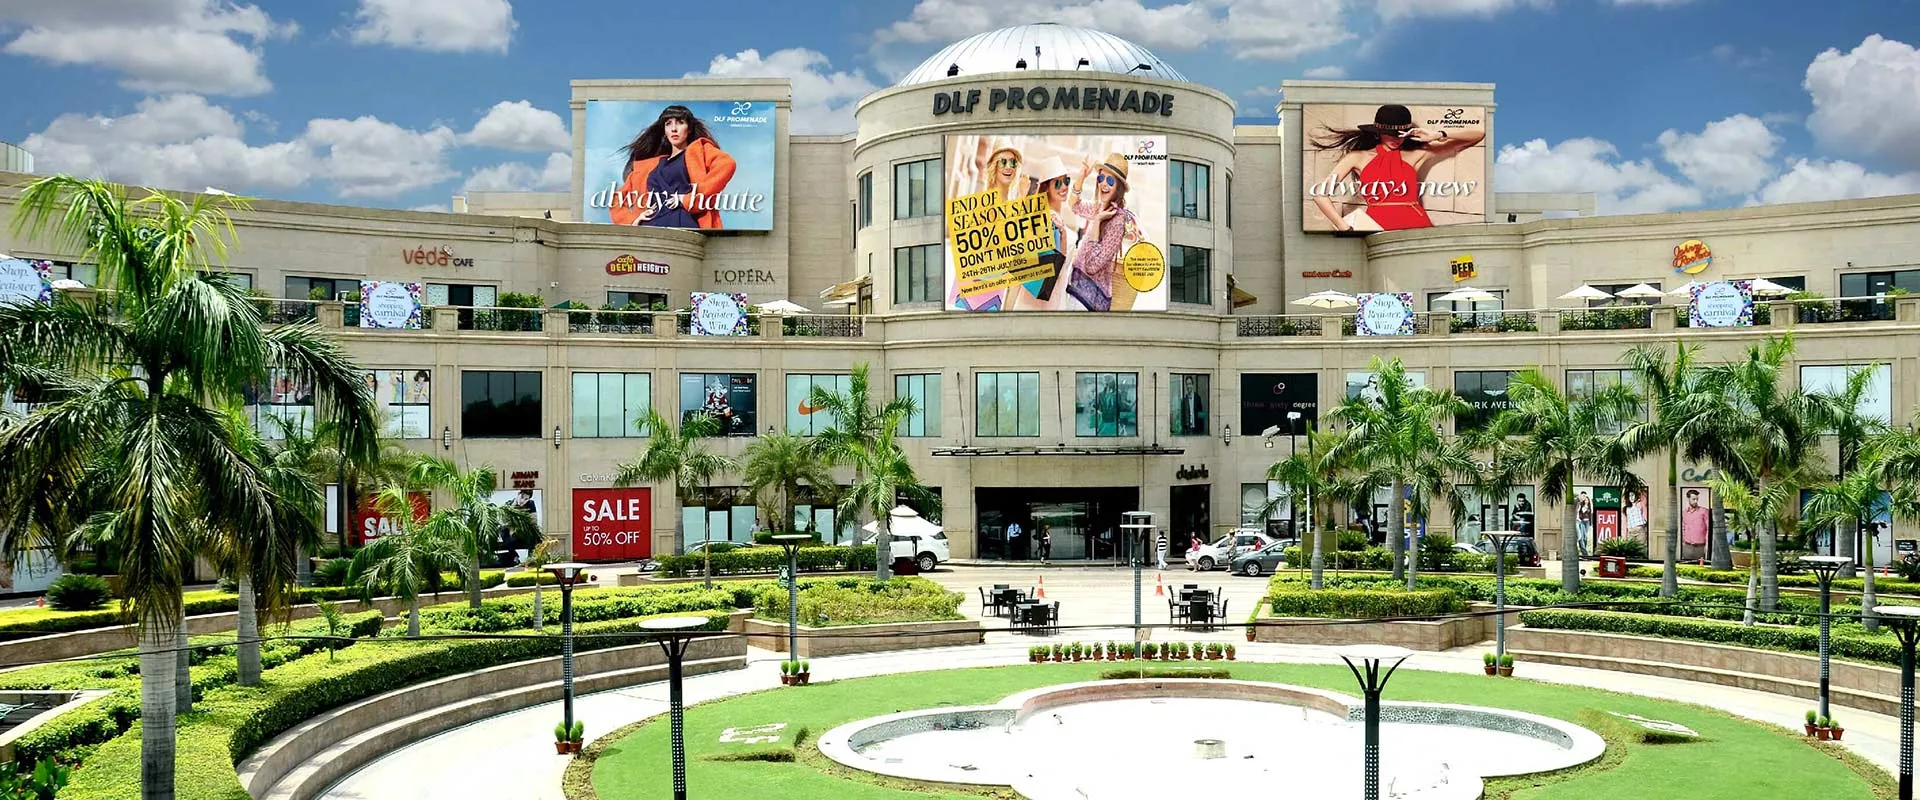 DLF Promenade in India, central_asia | Fragrance,Handbags,Shoes,Accessories,Clothes,Cosmetics - Country Helper